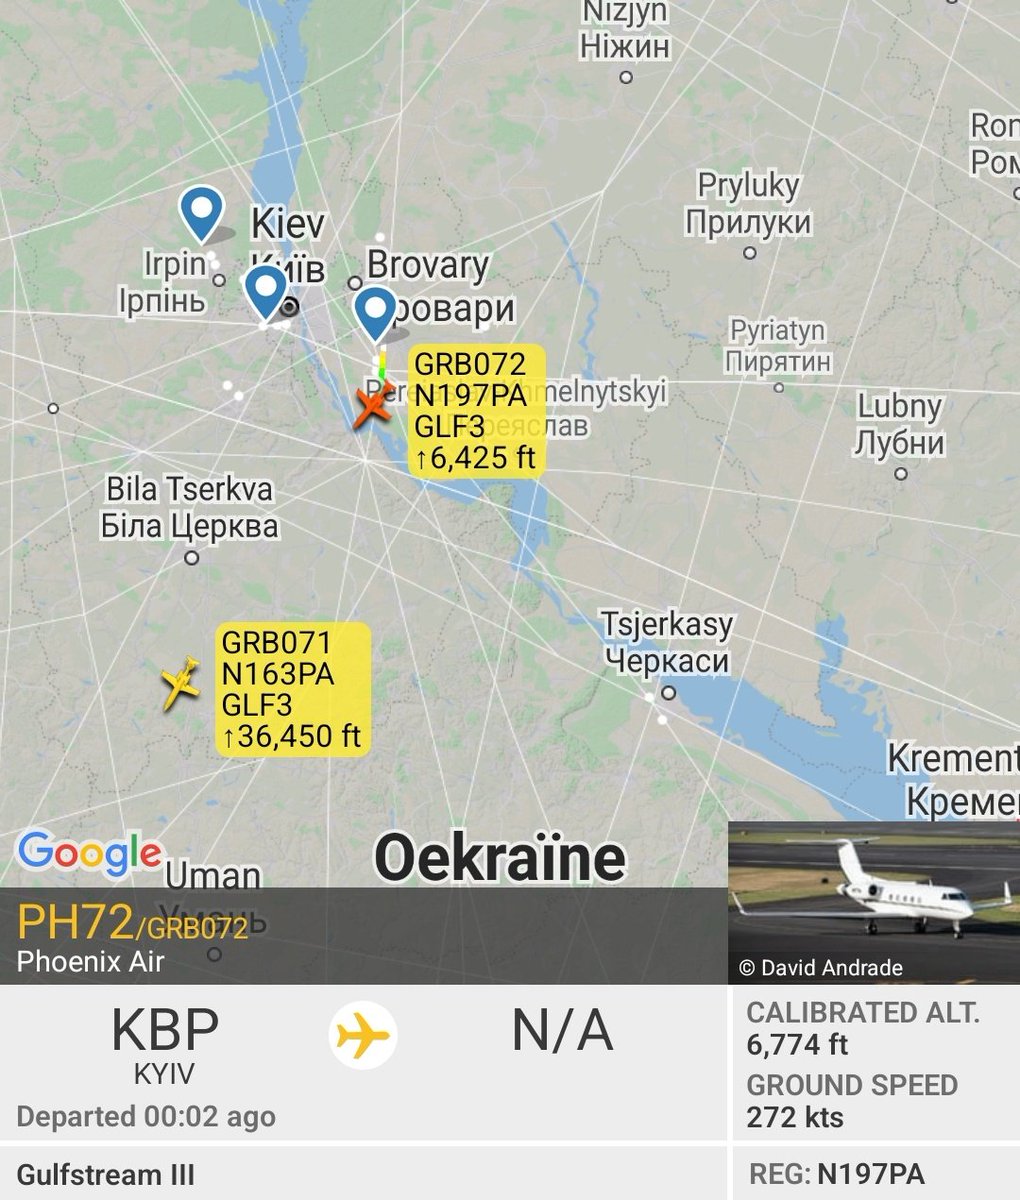 Two Phoenix Air Gulfstreams III N163PA N197PA visited Kyiv Boryspil in Ukraine last night and are returning now. Could be evacuating American staff